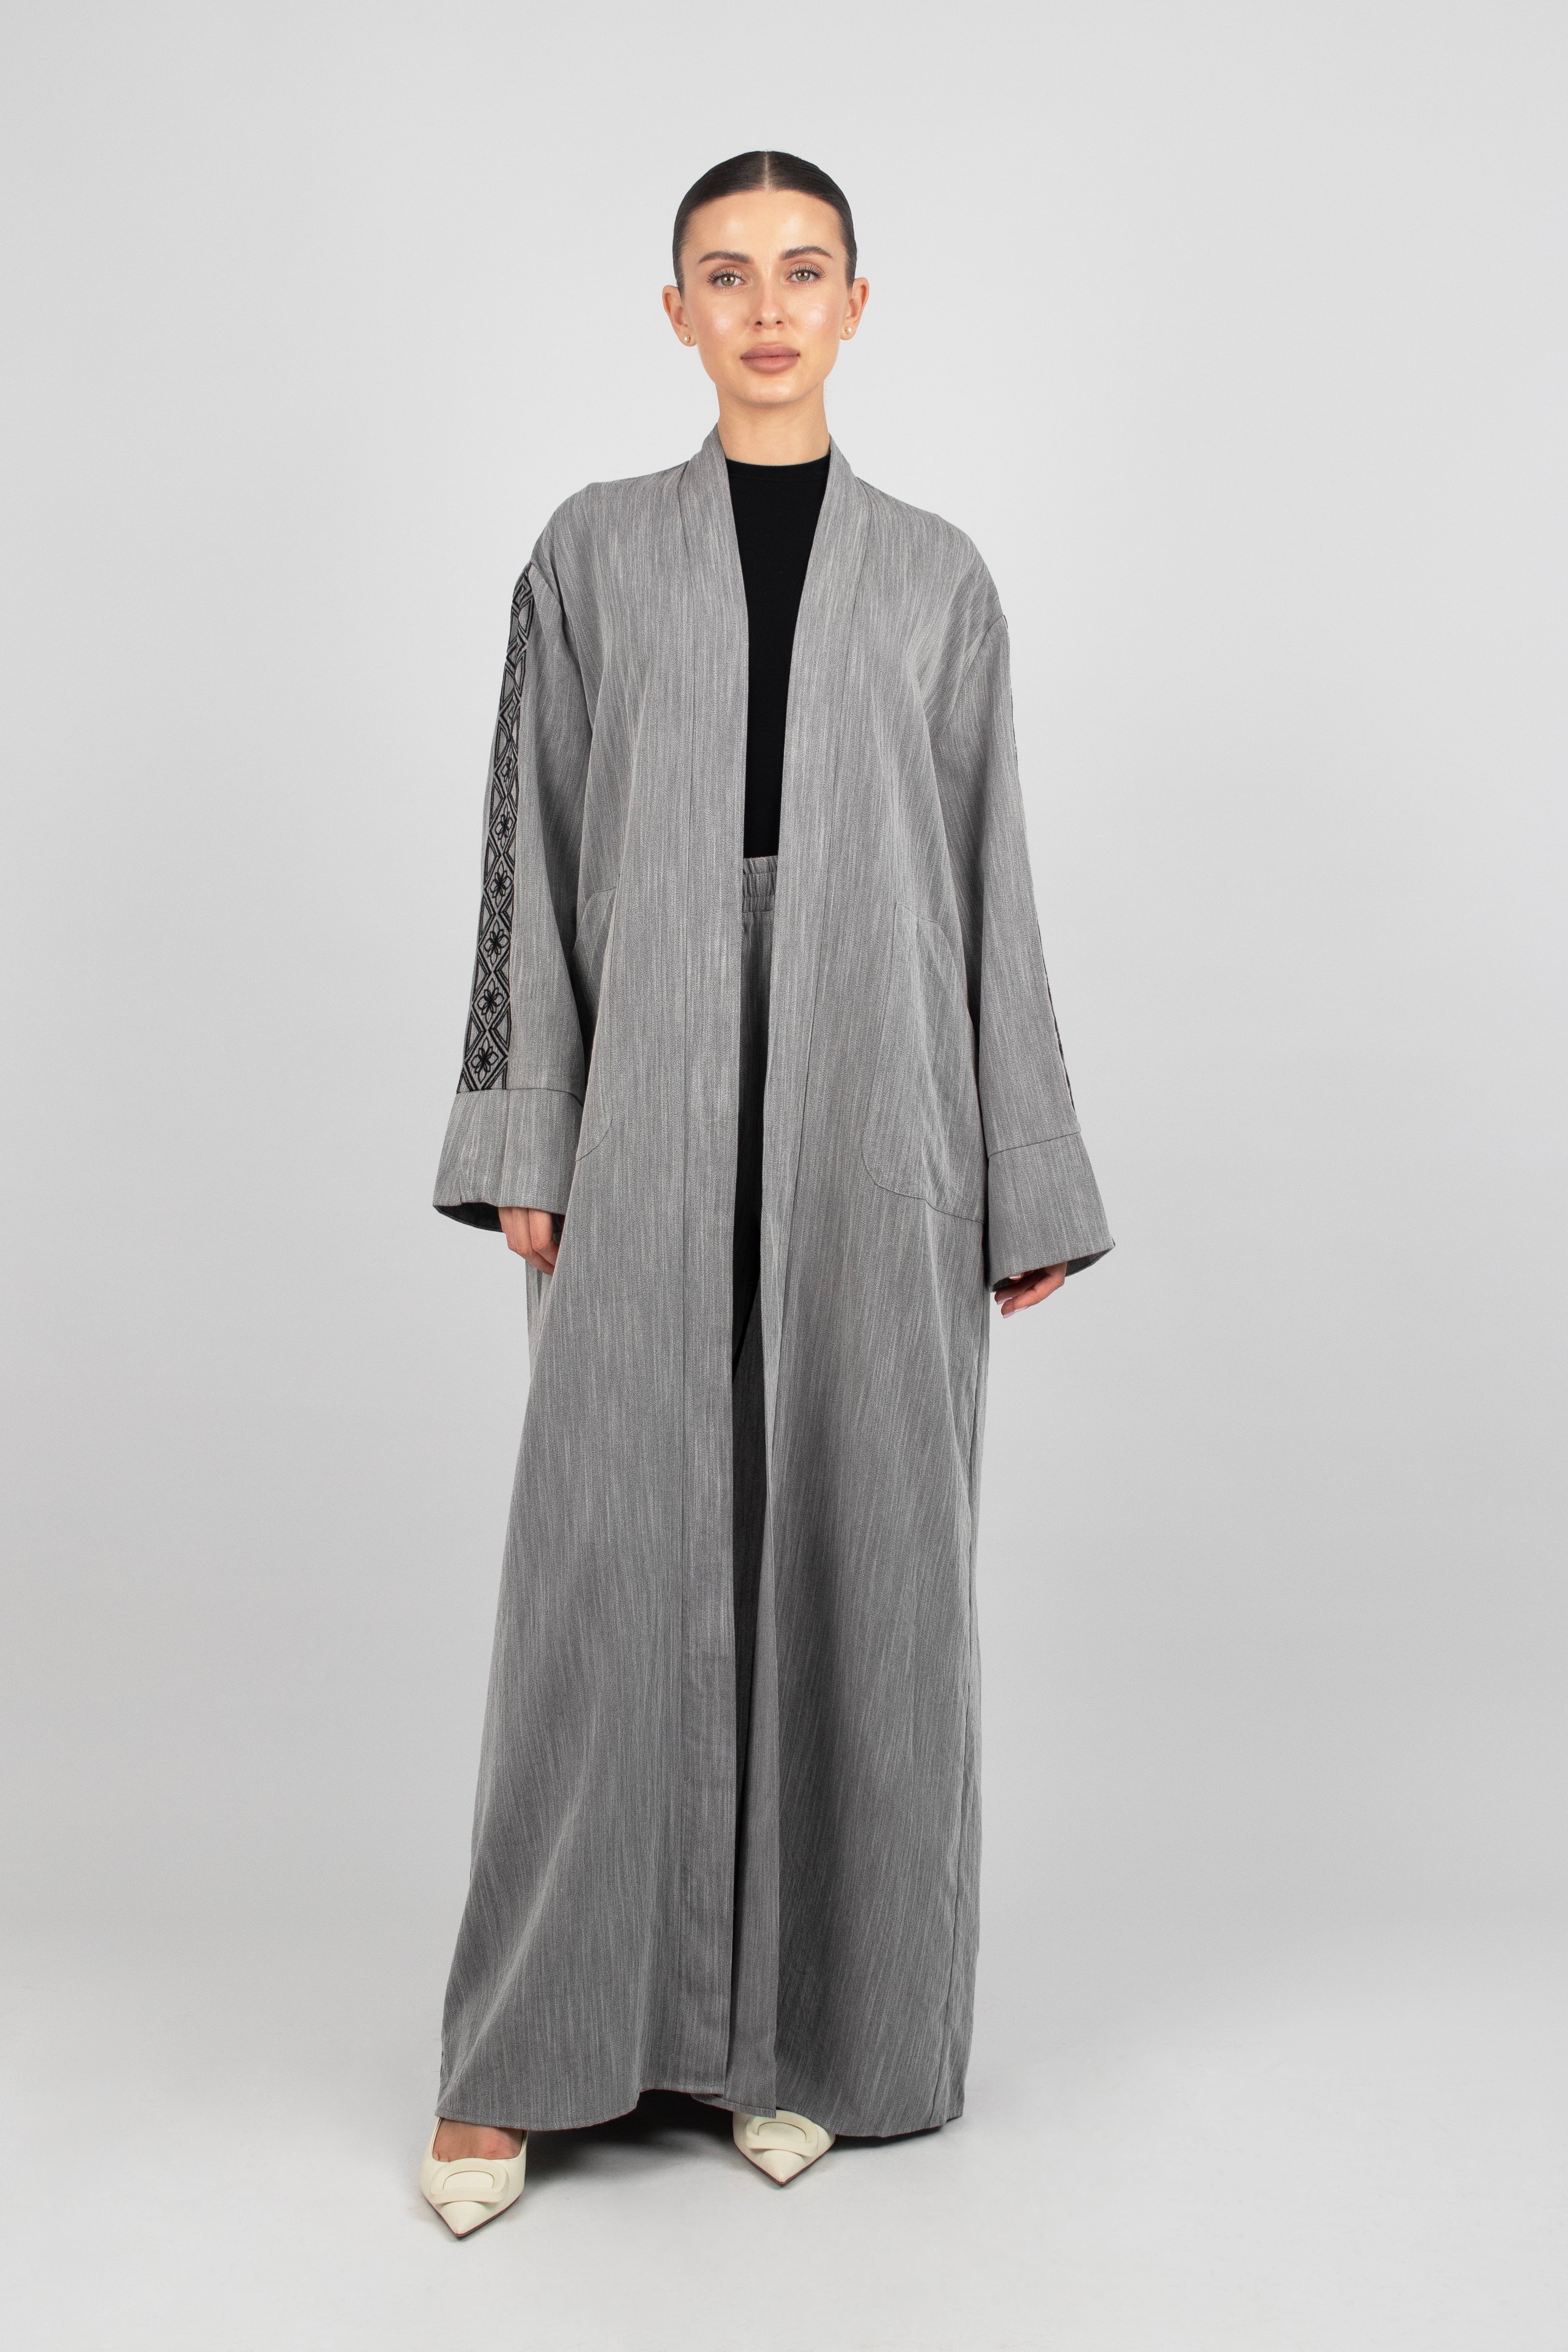 US - Embroidered Sleeve Abaya - Sterling